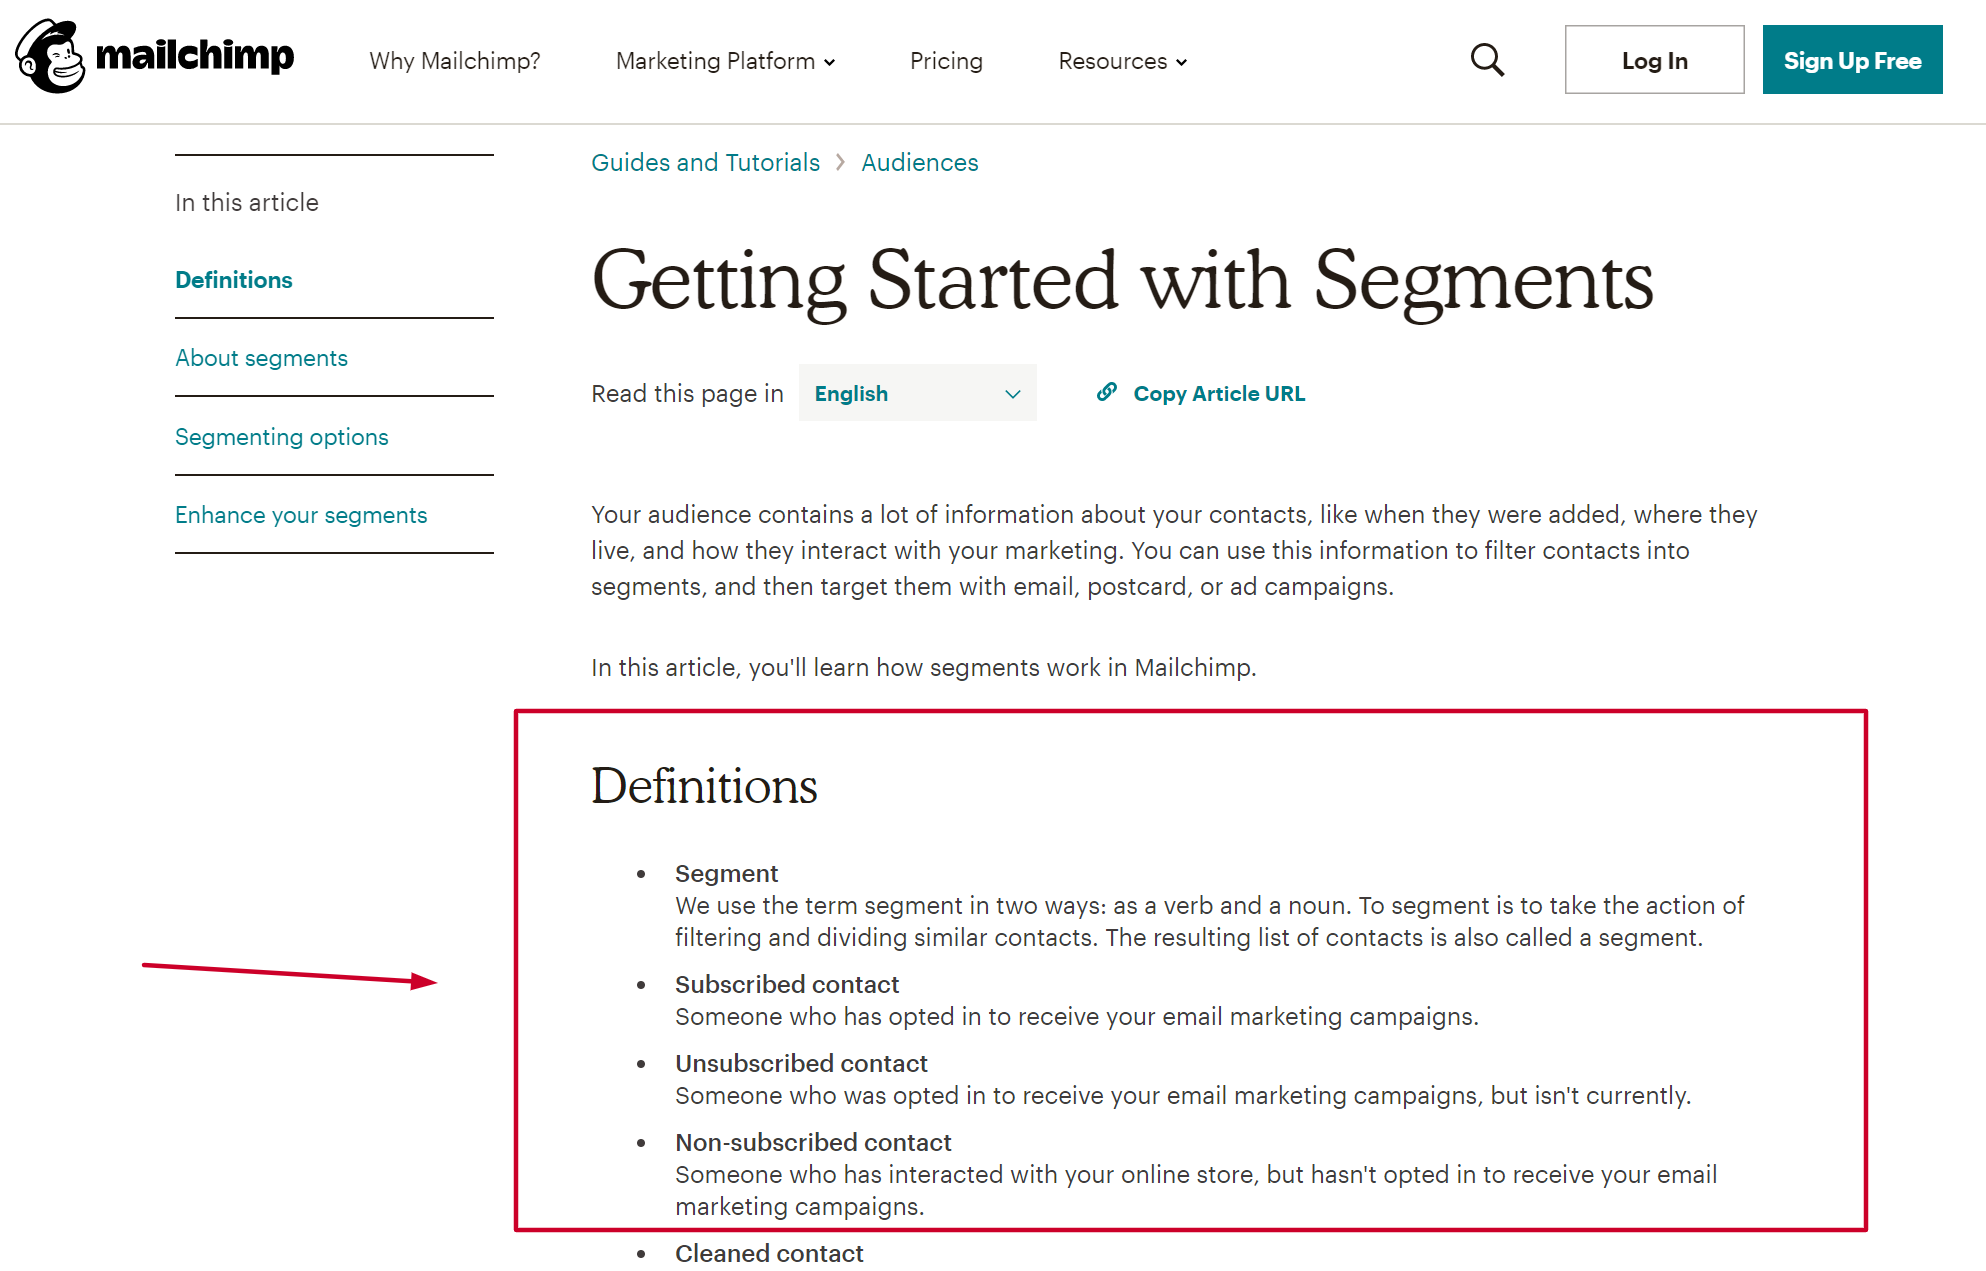 Example of knowledge base article from Mailchimp